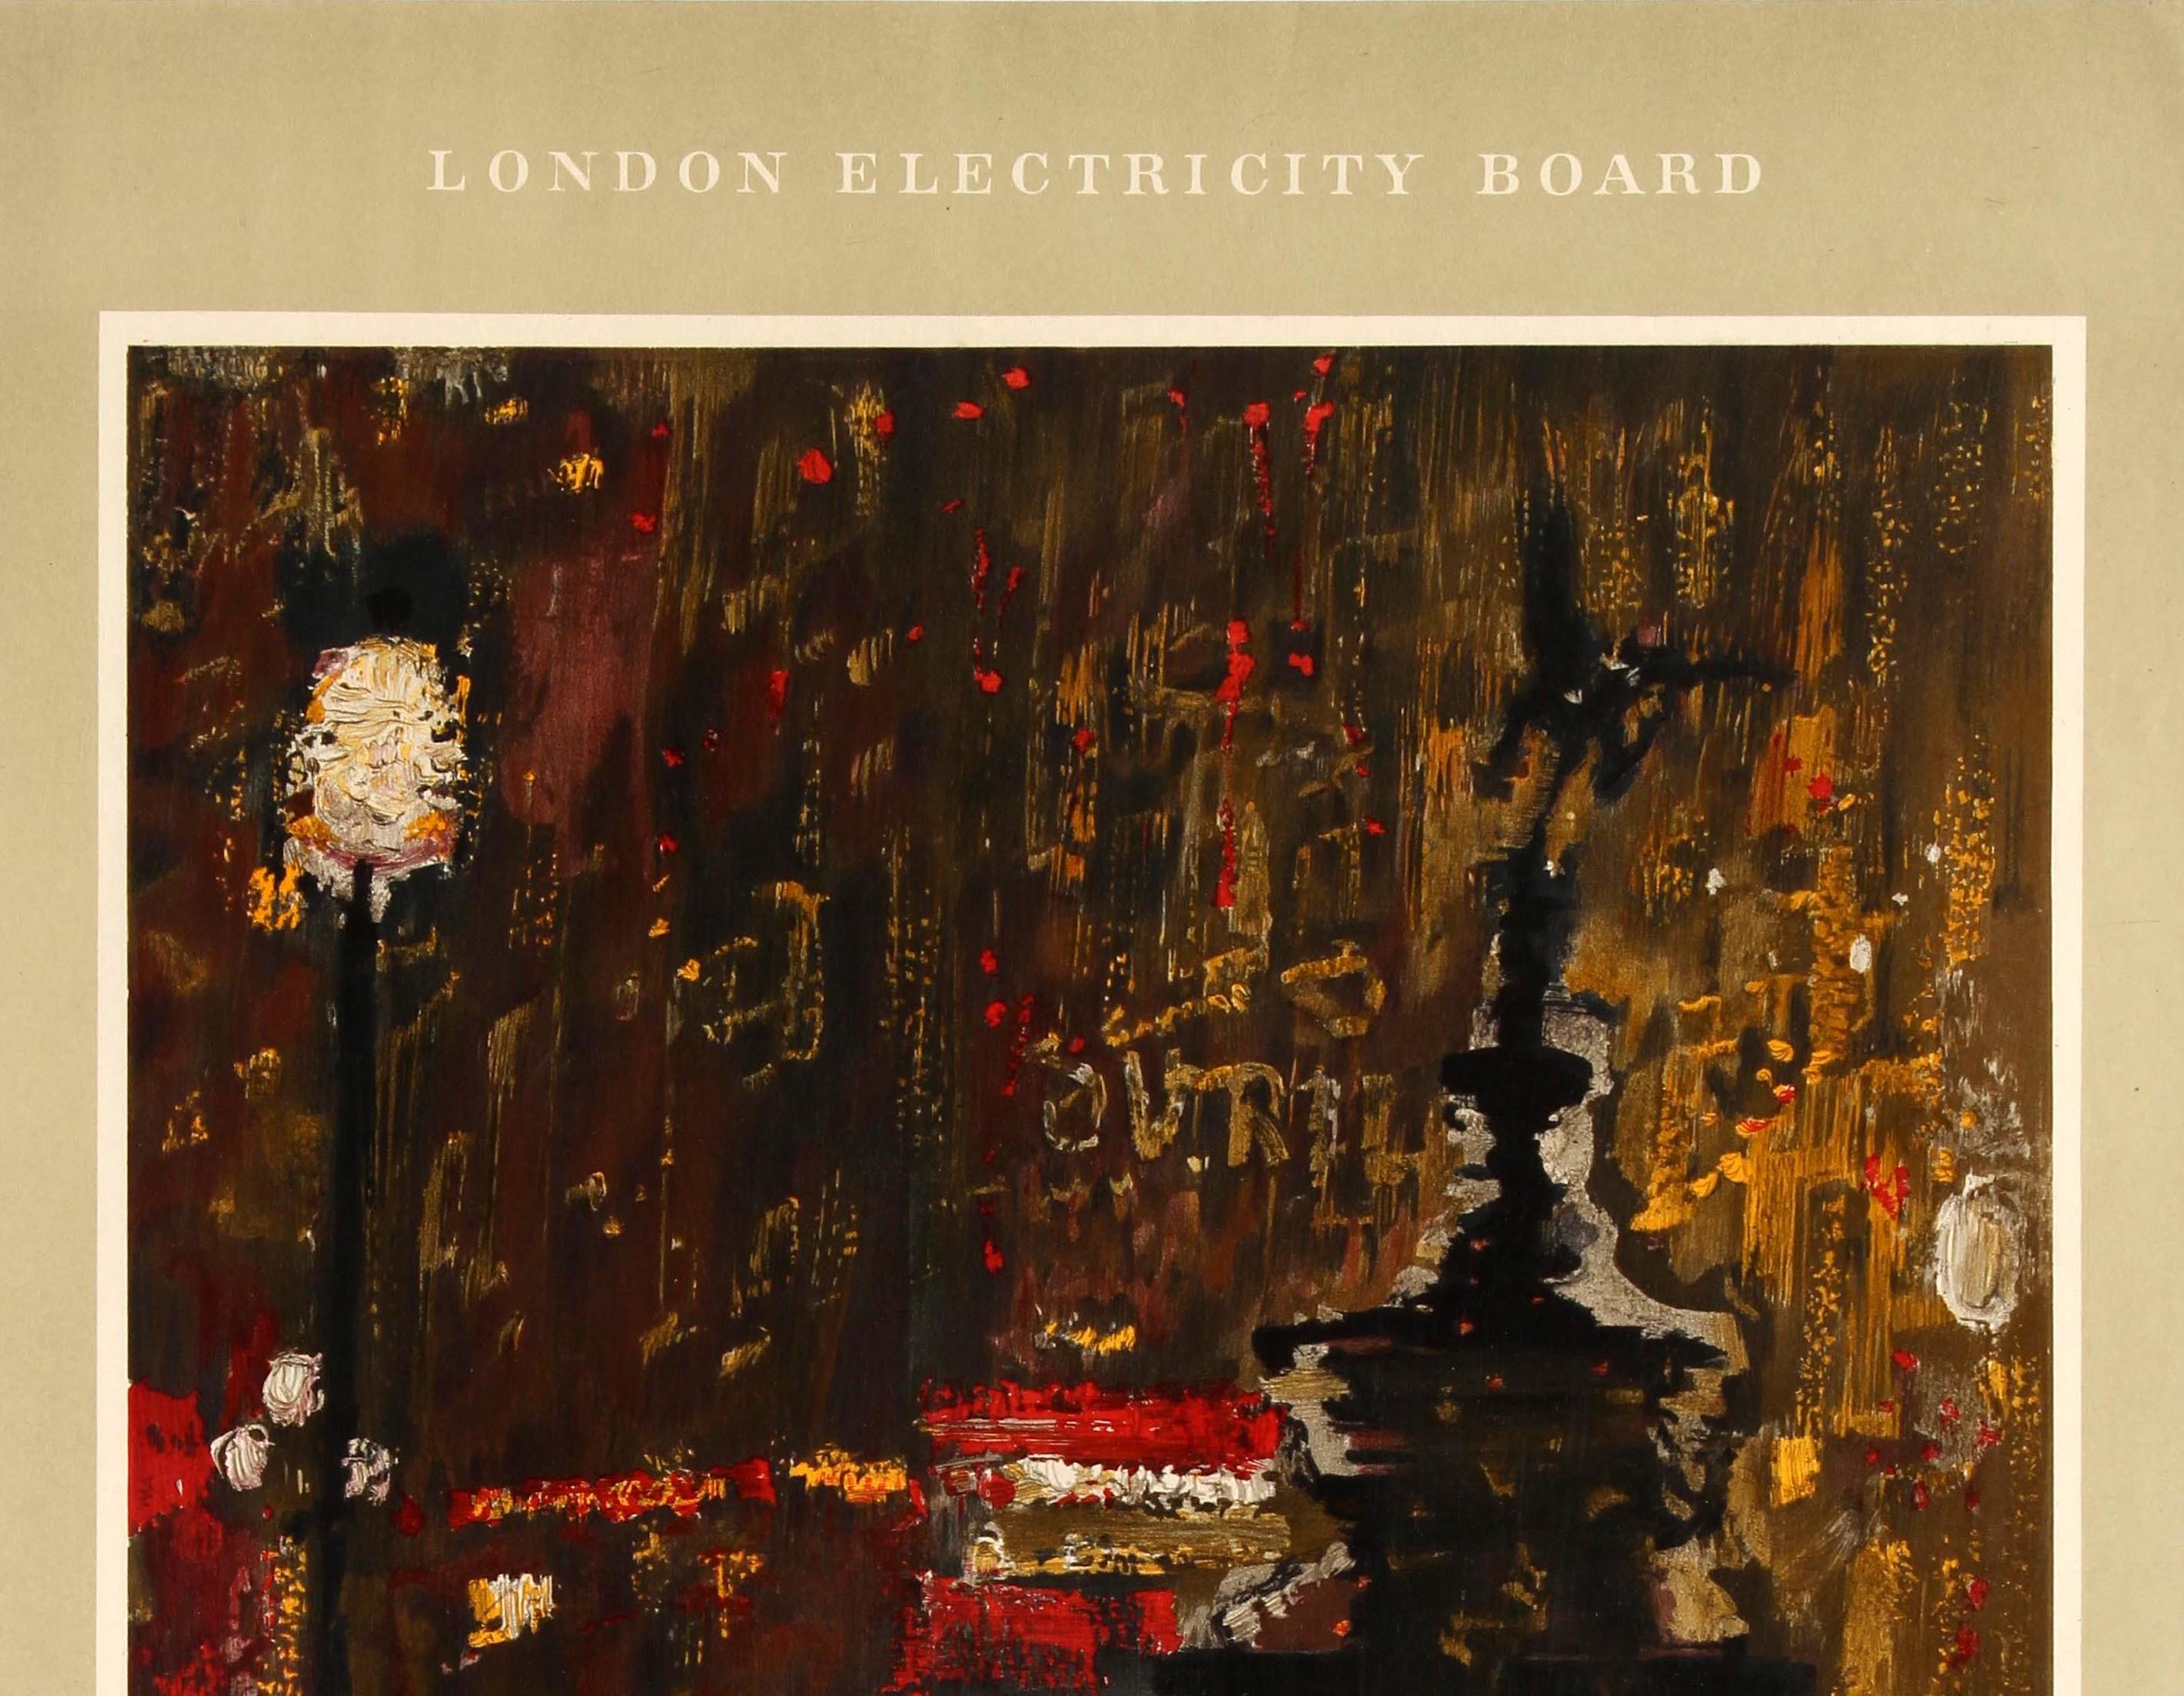 Original vintage London Electricity Board poster entitled The Power of London, Electricity featuring fantastic artwork from the painting by Ruskin Spear (1911-1990) showing Piccadilly Circus at night with people in the foreground and the Bovril and